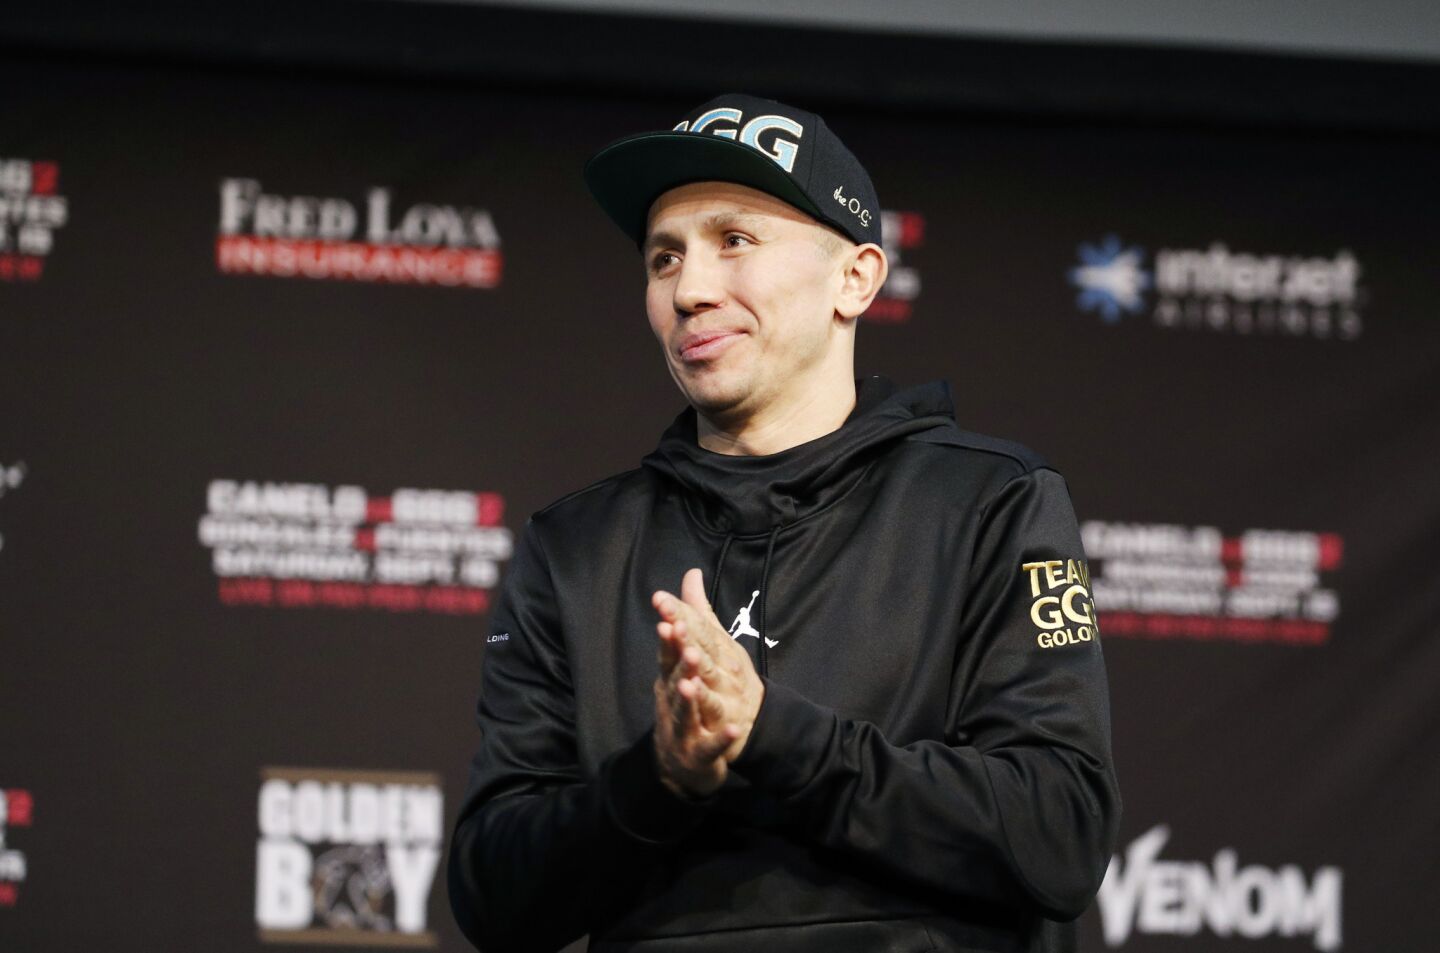 Gennady Golovkin gestures during a news conference with Canelo Alvarez, Wednesday, Sept. 12, 2018, in Las Vegas. The two are scheduled to fight in a title bout Saturday in Las Vegas. (AP Photo/John Locher)